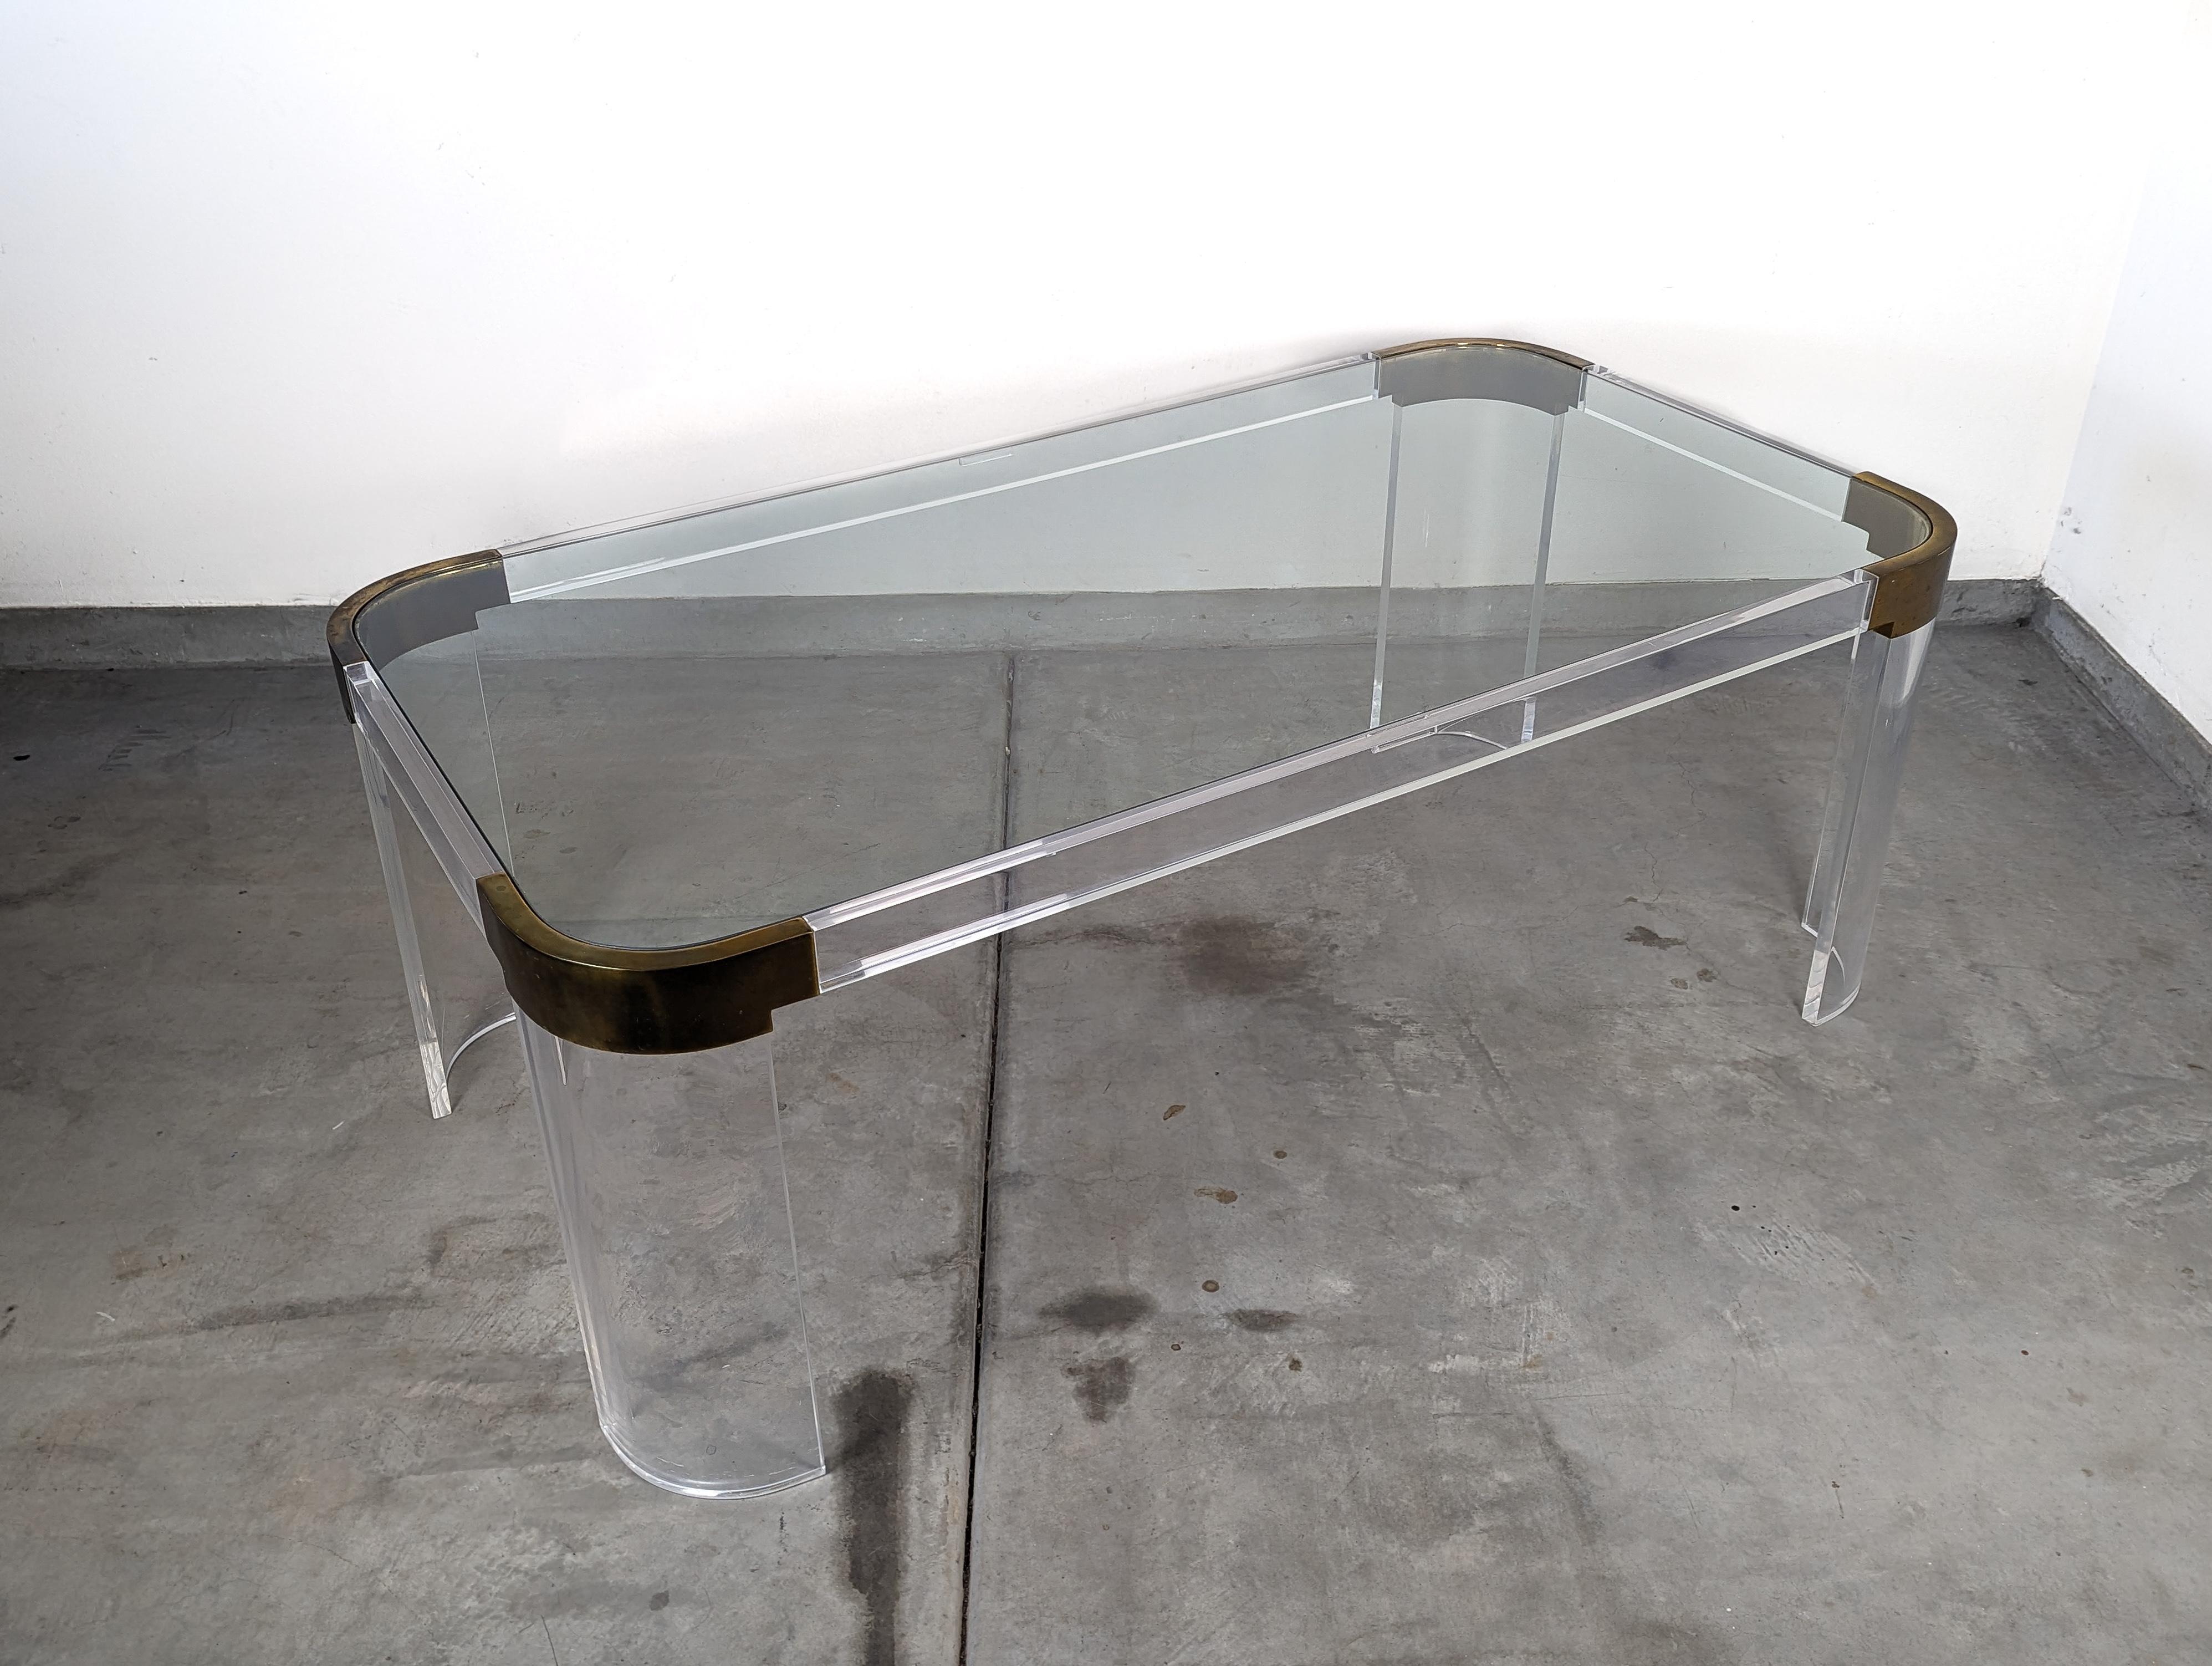 Step into the realm of vintage elegance with this exquisite 1970s Lucite dining table, a remarkable piece from the illustrious Gourmet 